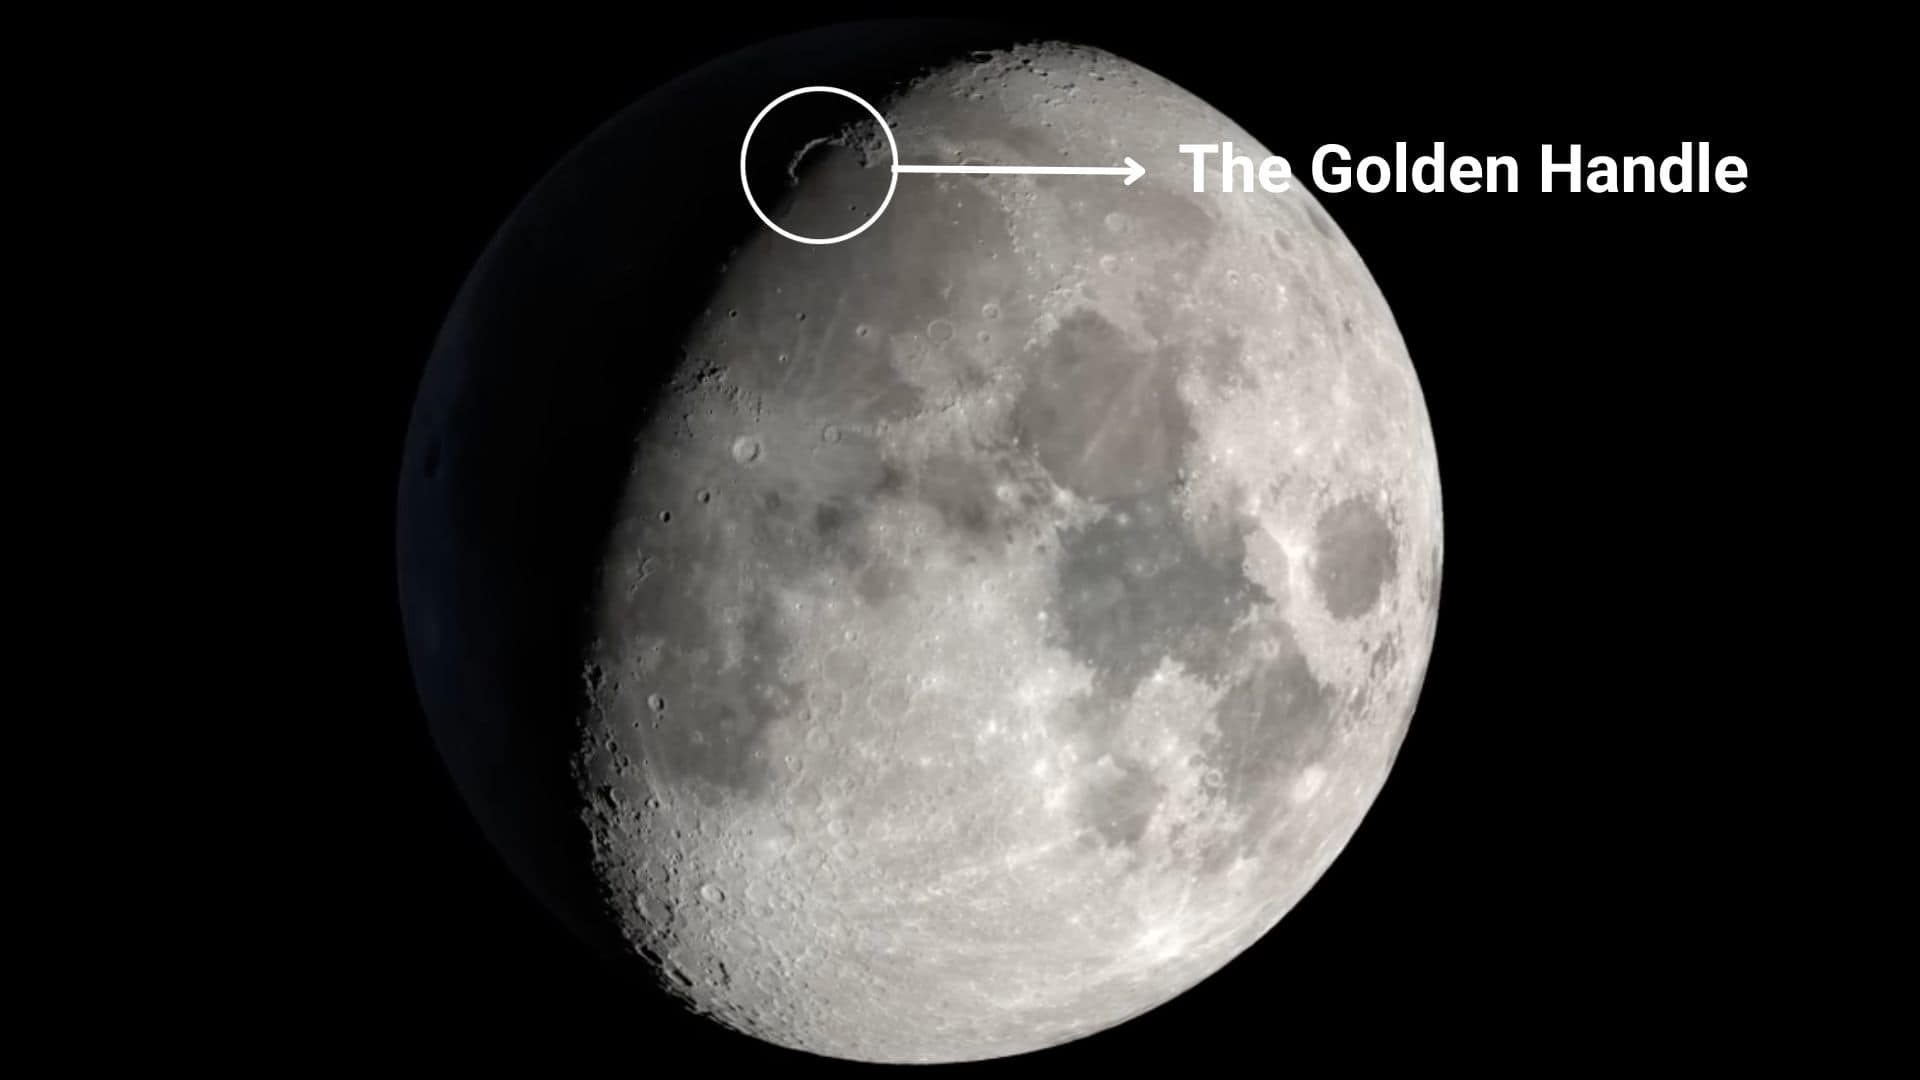 The Golden Handle is seen on the lunar terminator during the waxing gibbous moon